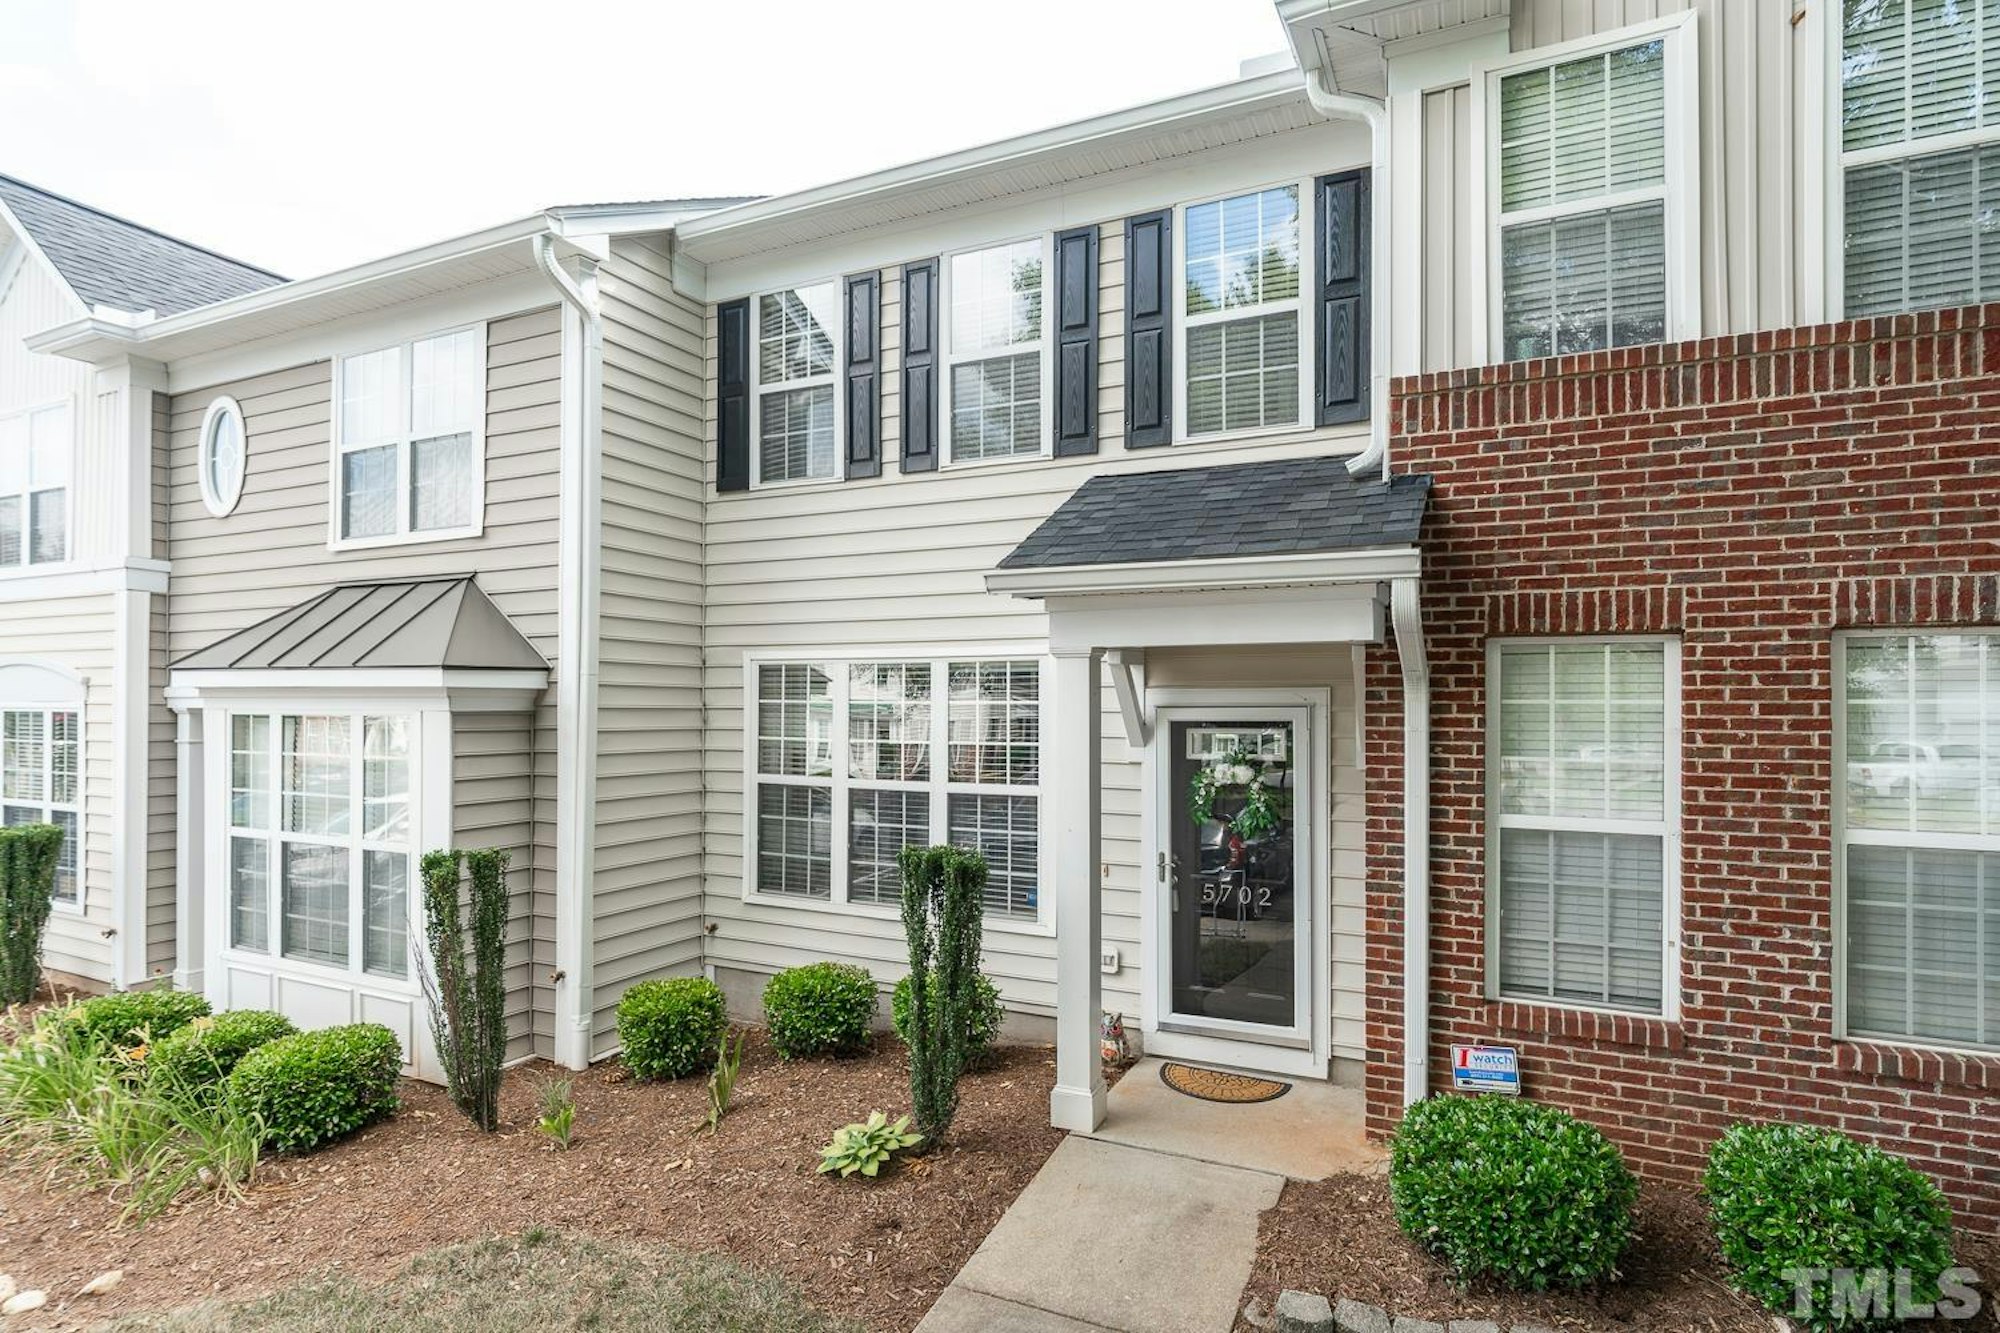 Photo 1 of 24 - 5702 Corbon Crest Ln, Raleigh, NC 27612